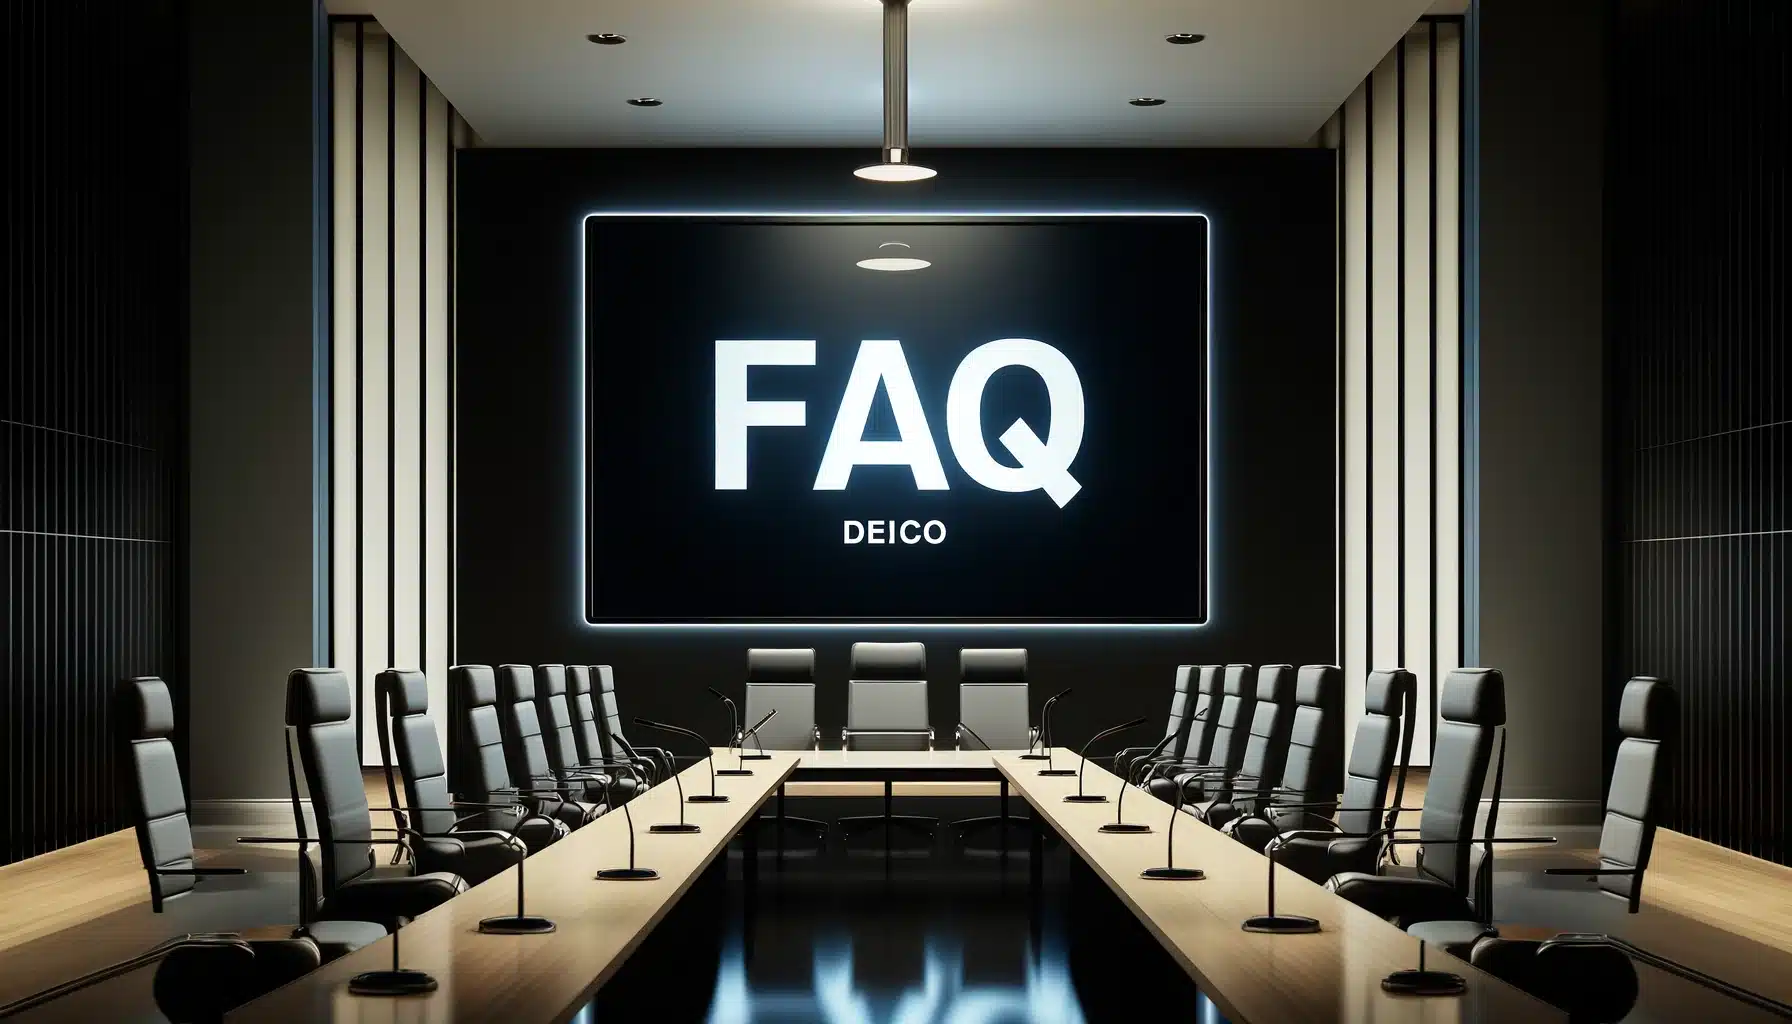 Large digital display in a modern conference room showing 'FAQ'